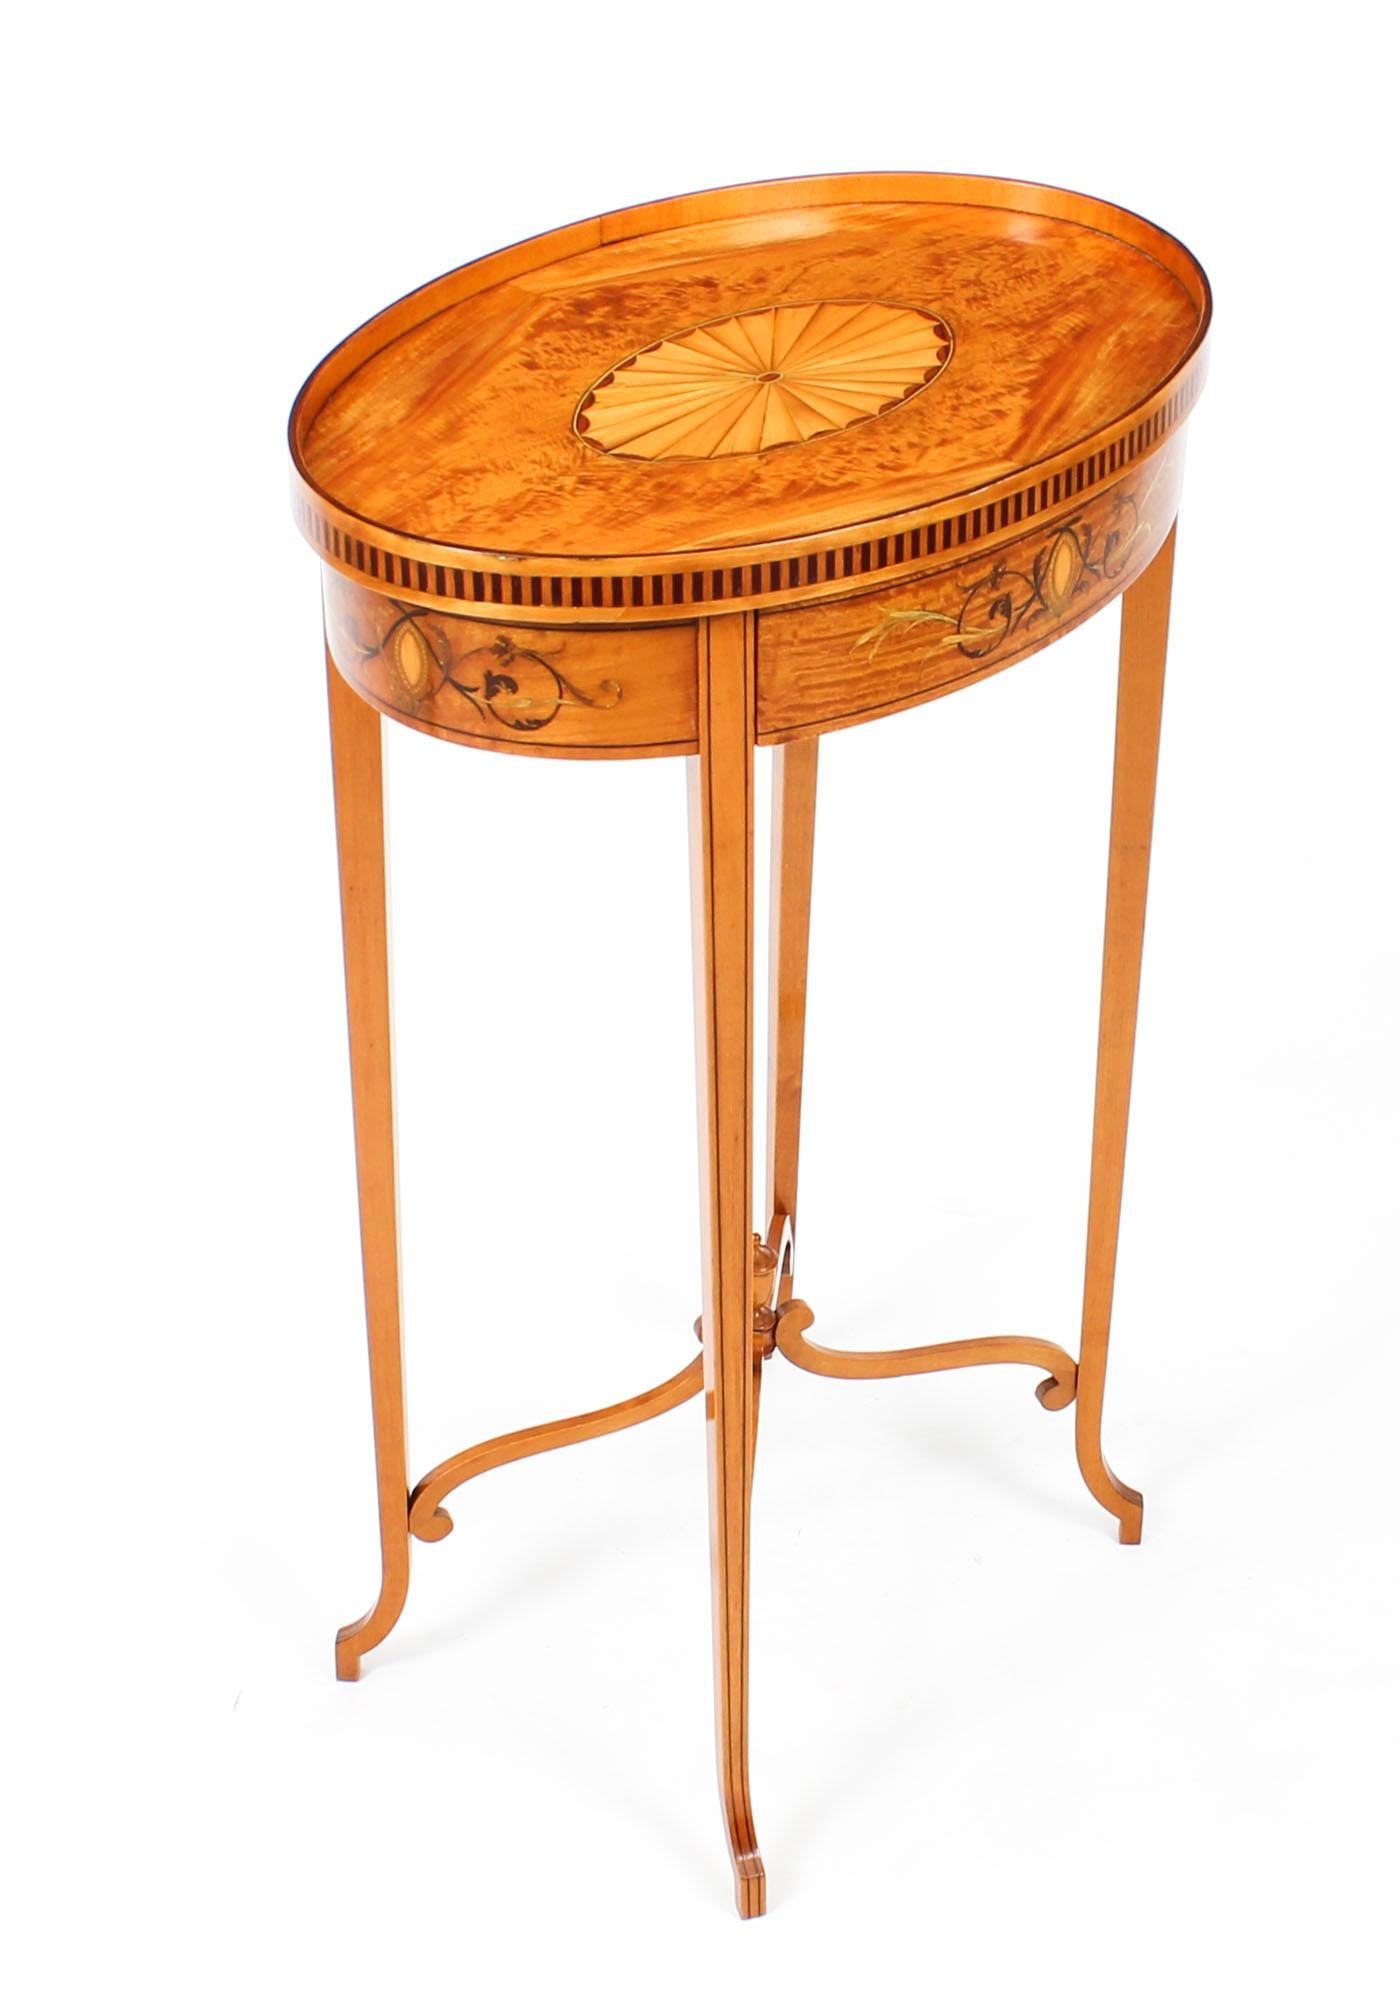 Antique Marquetry & Shell Inlaid Satinwood Oval Occasional Table, 19th Century 5